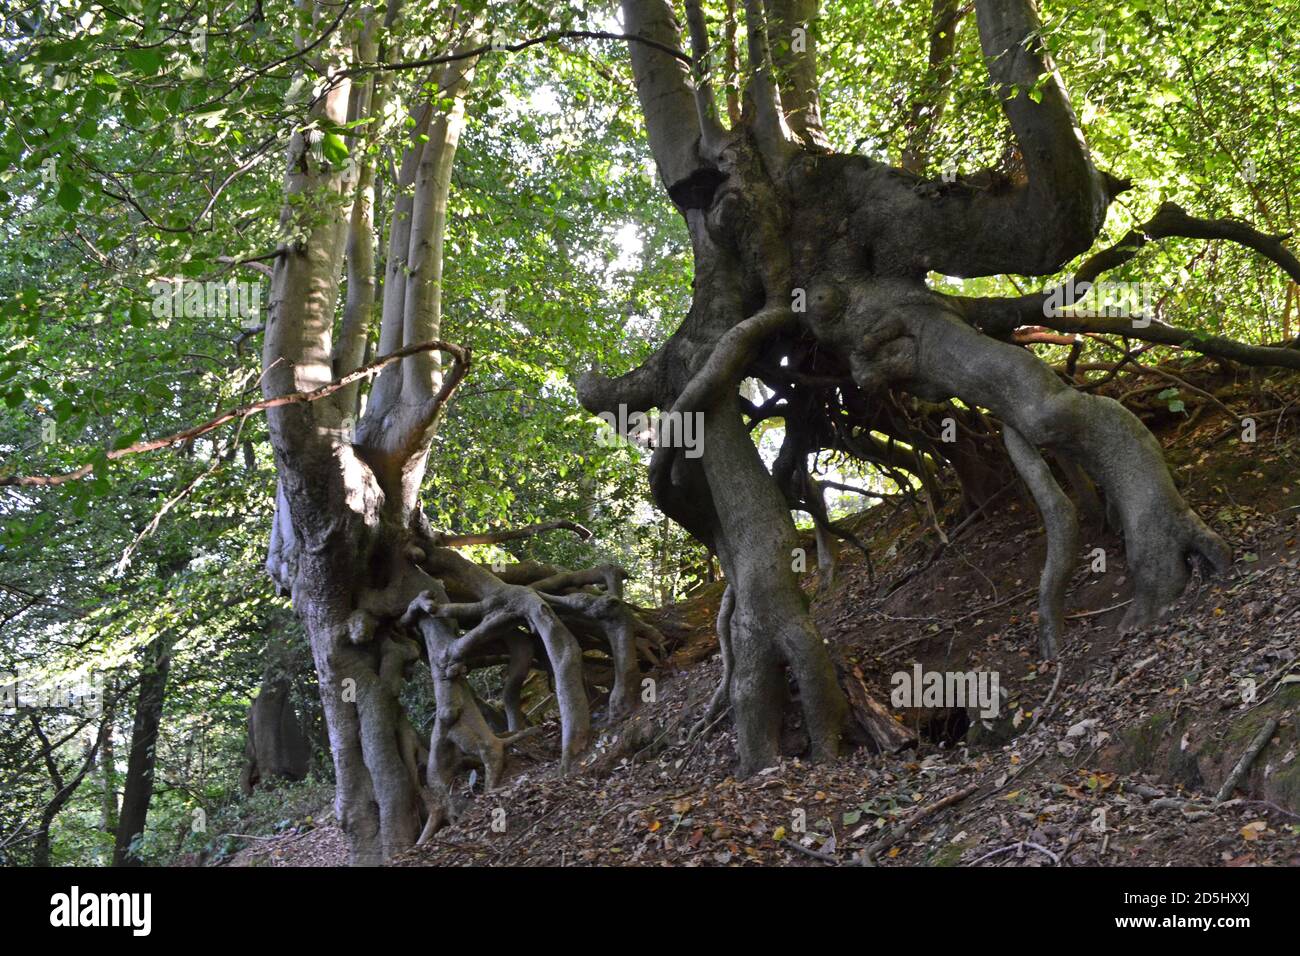 Incredible beech trees growing out of sandstone hillside, Greensand Ridge, Sevenoaks. Bizarre trees look alive - like Lord of the Rings' Ents Stock Photo